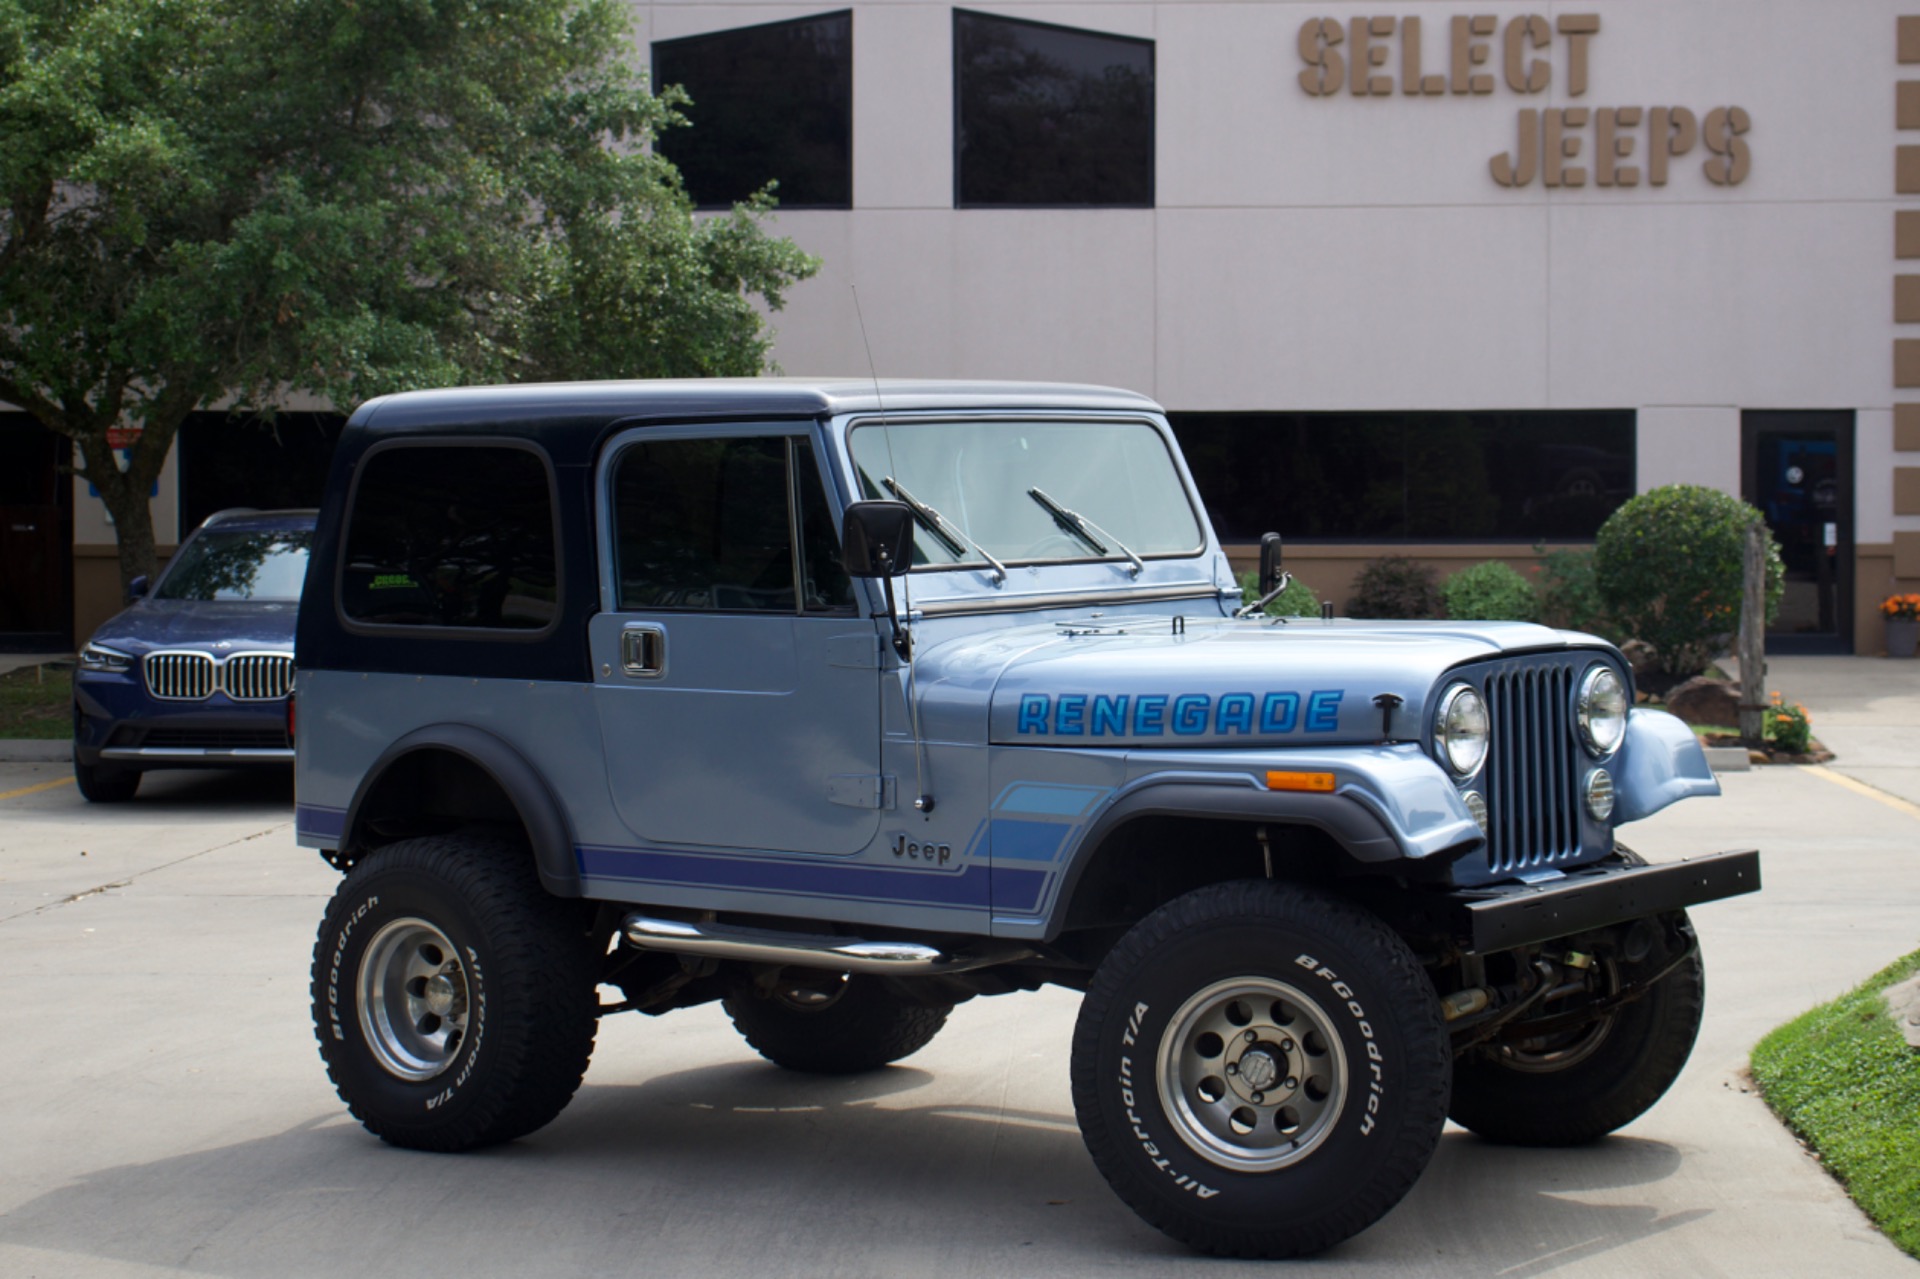 Used 1984 Jeep CJ-7 For Sale ($34,995) | Select Jeeps Inc. Stock #044551